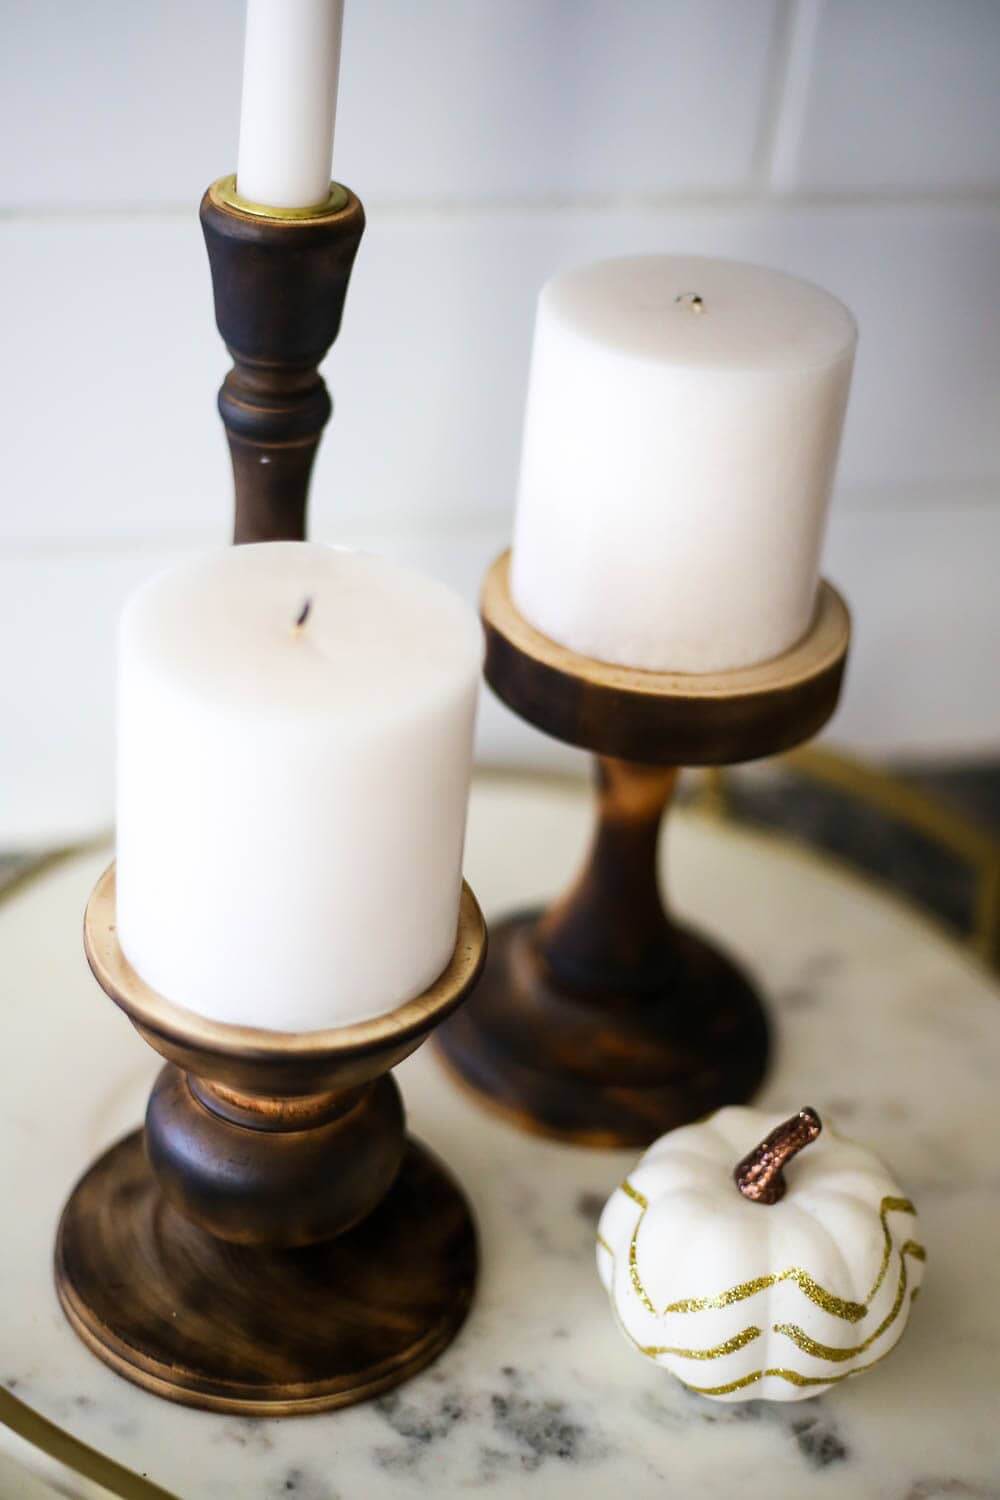 15 Awesome DIY Candle Holder Projects You Can Make In A Heartbeat